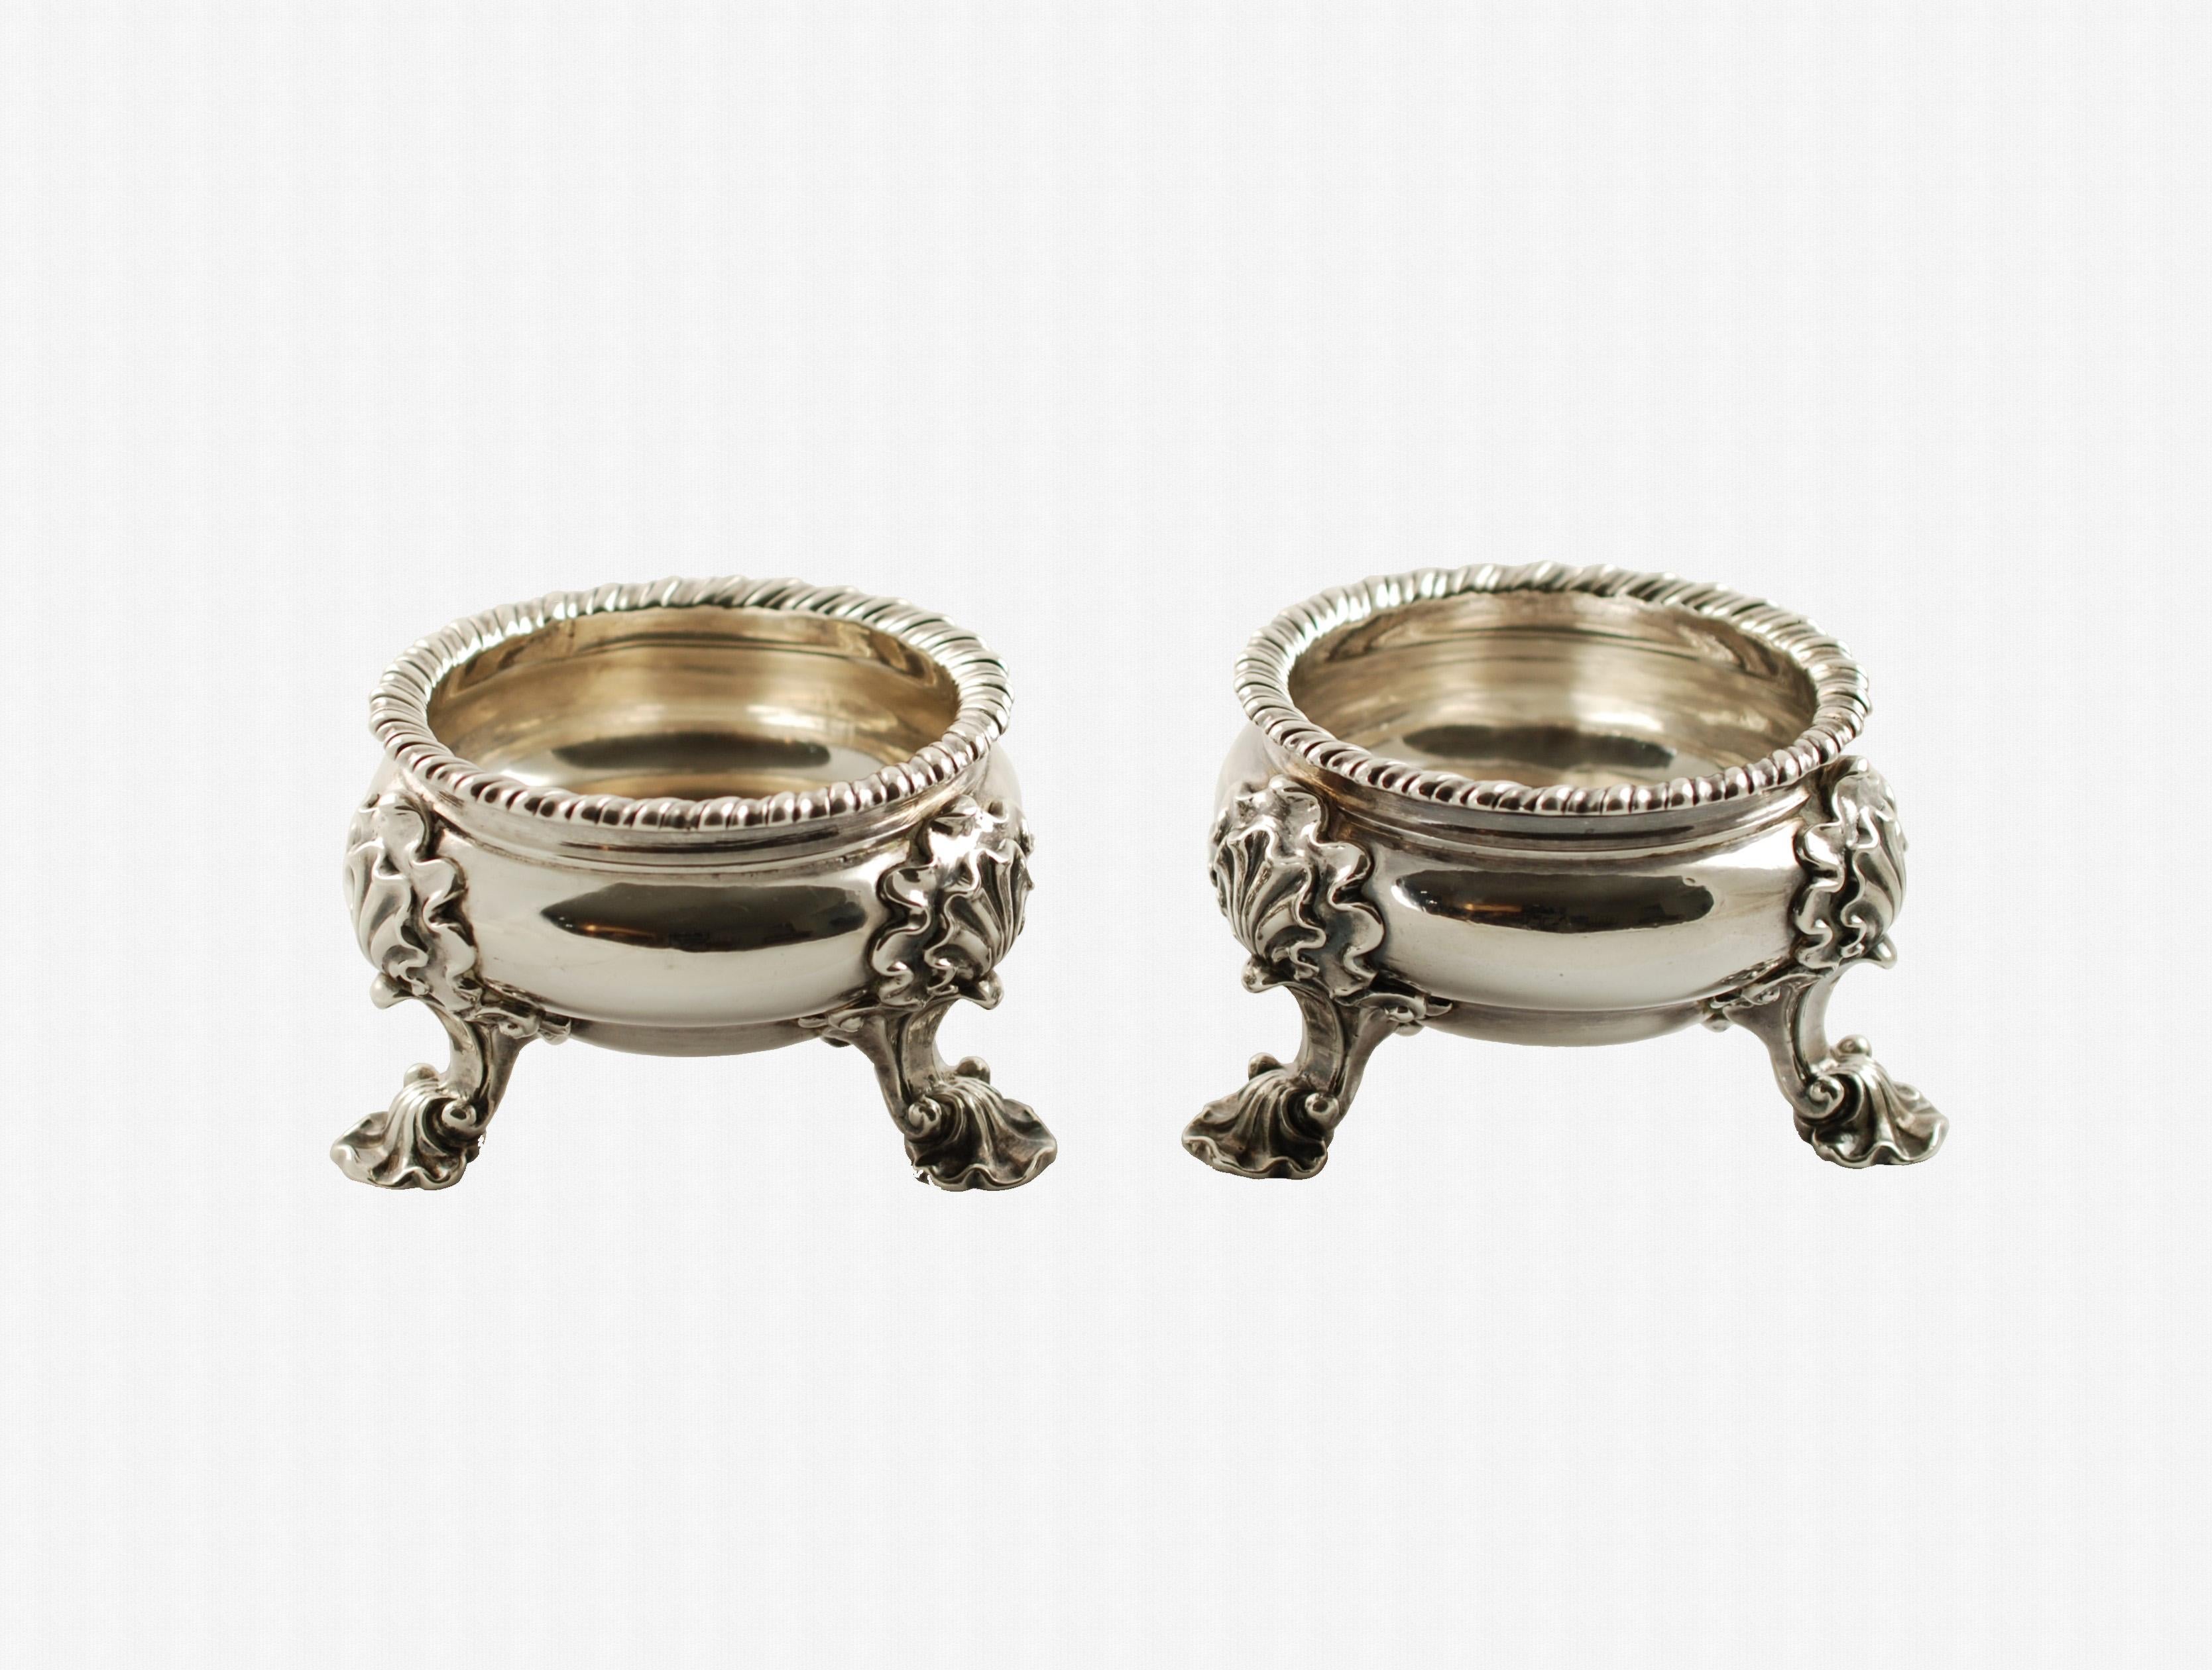 This substantial pair of English sterling silver master salts were made in 1741-1742 during the reign of King George II by London silversmith Lewis Pantin I. The bowls have a gadroon edge and rest on three ornate shell form feet. The set displays